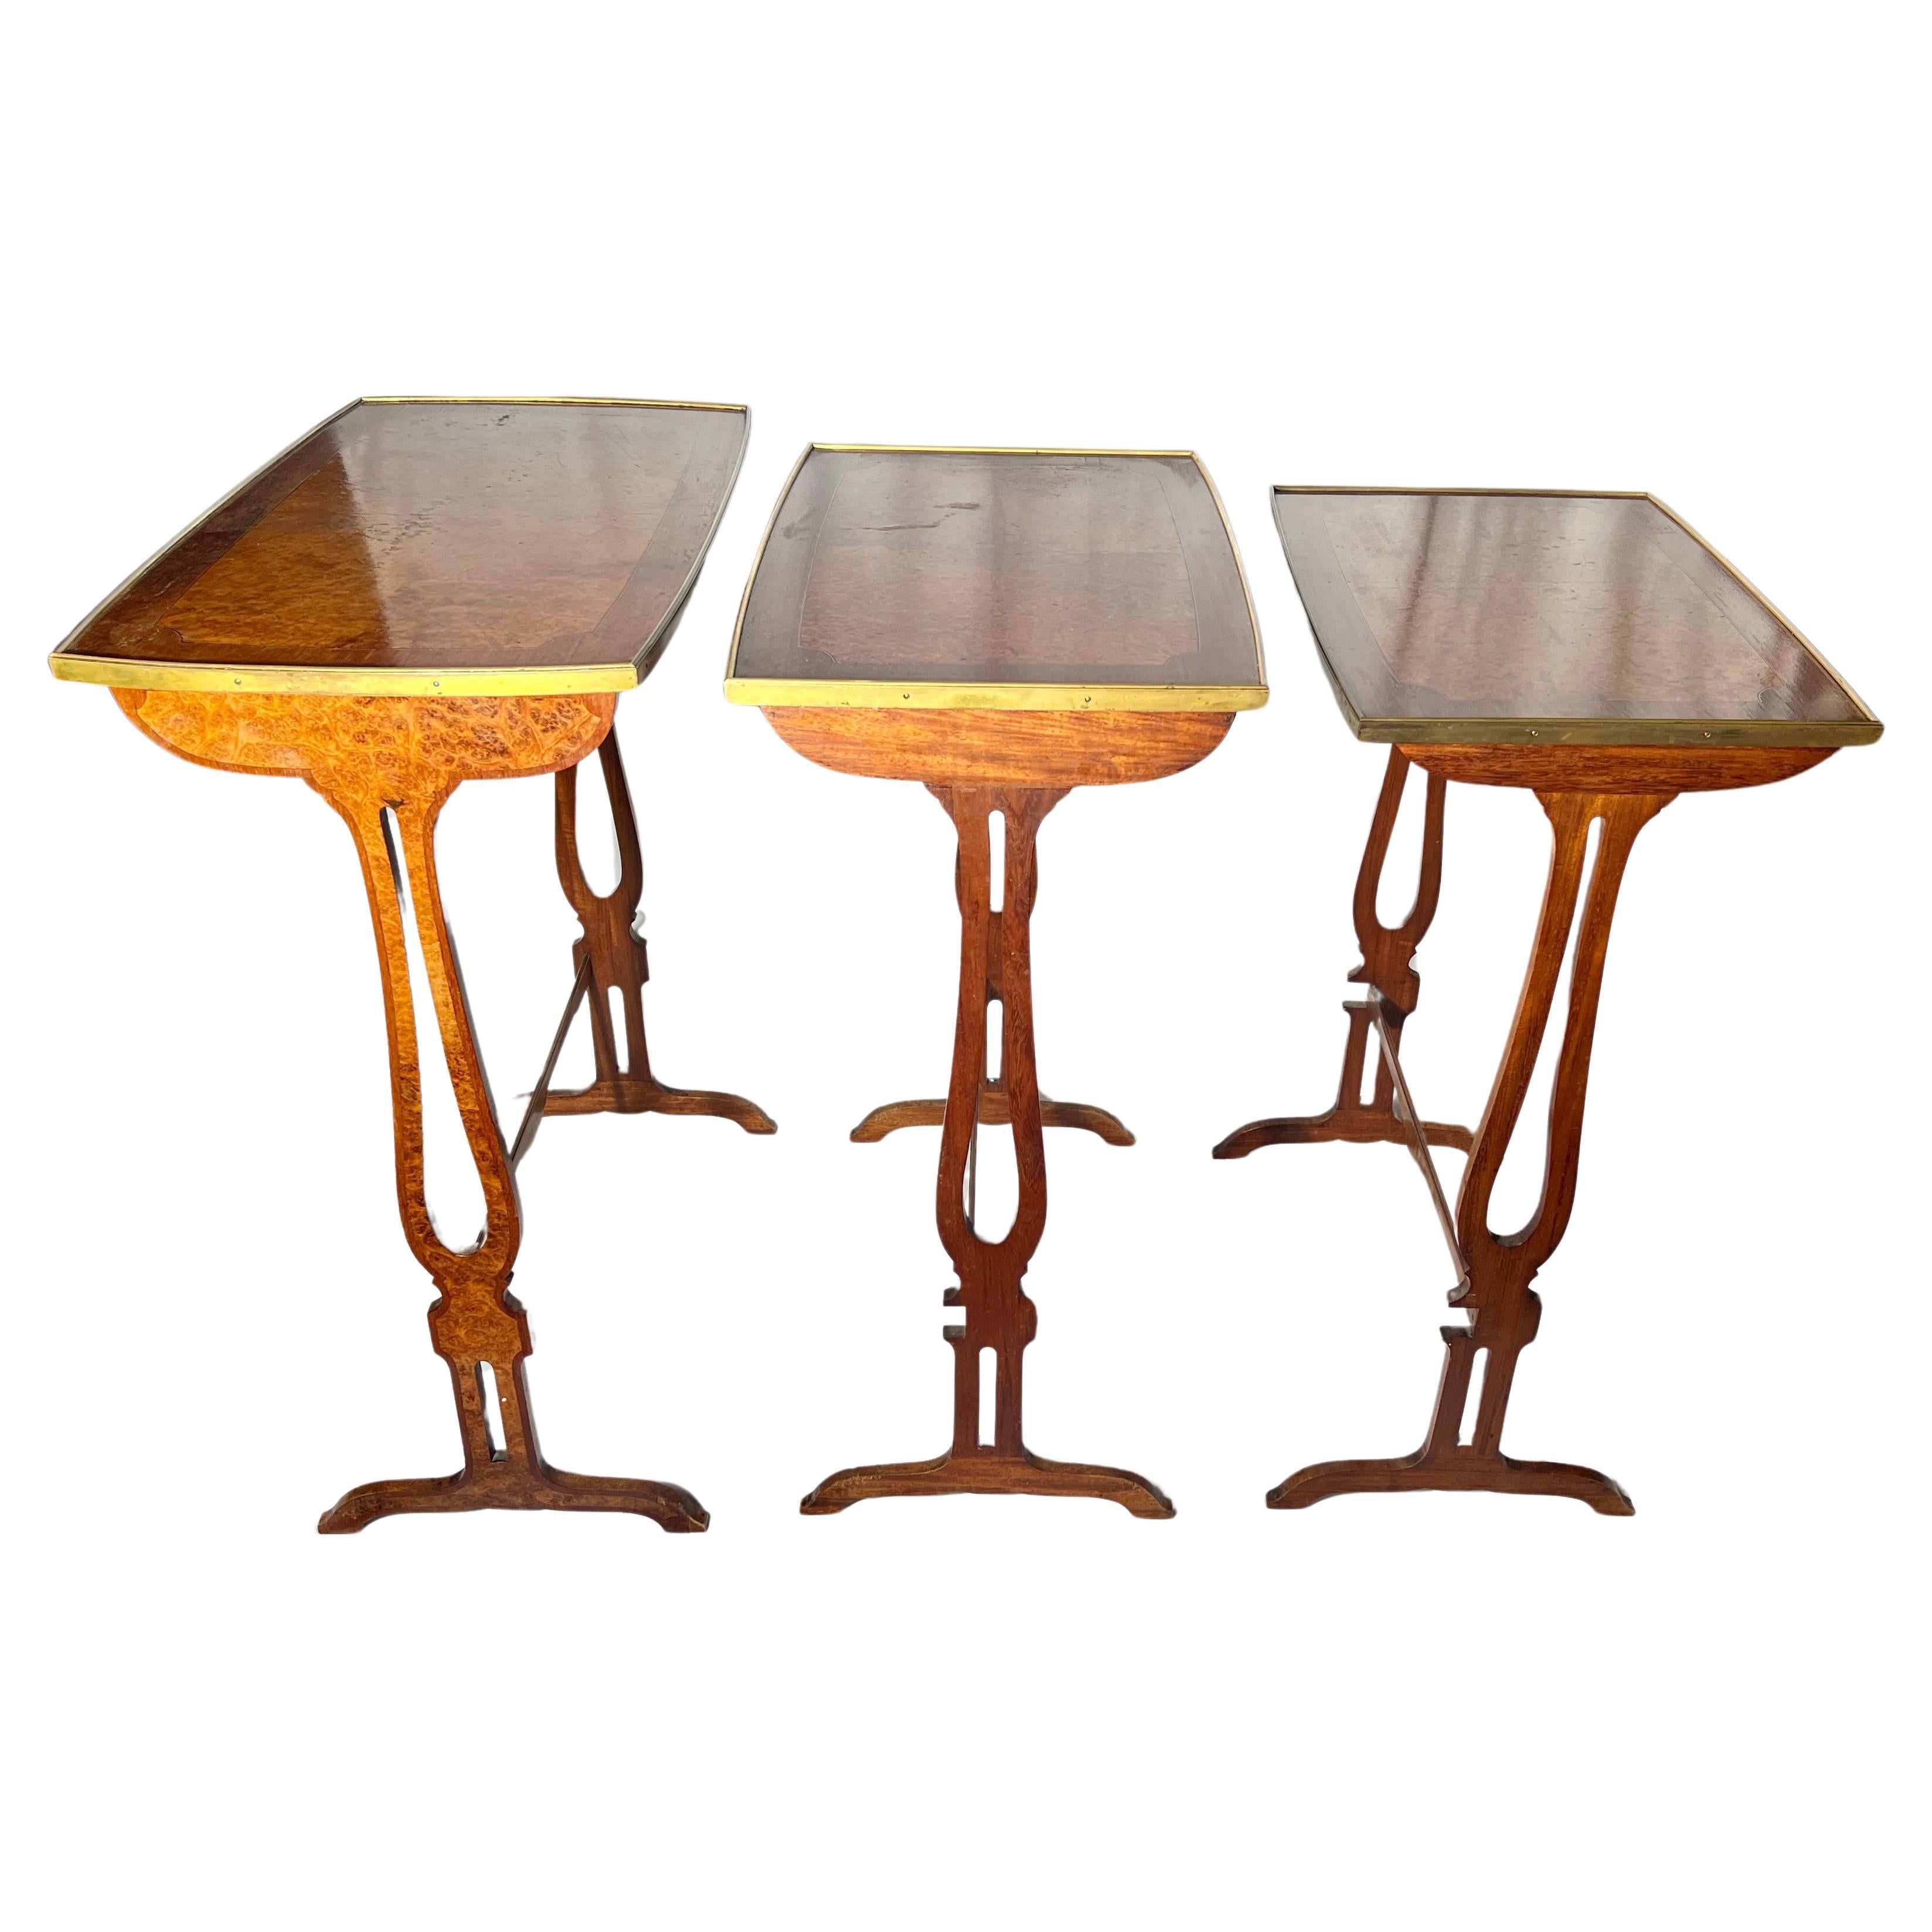 19th Century Antique French Bronze Trimmed Briarwood and Walnut Nest of 3 Tables, Circa 1885. For Sale